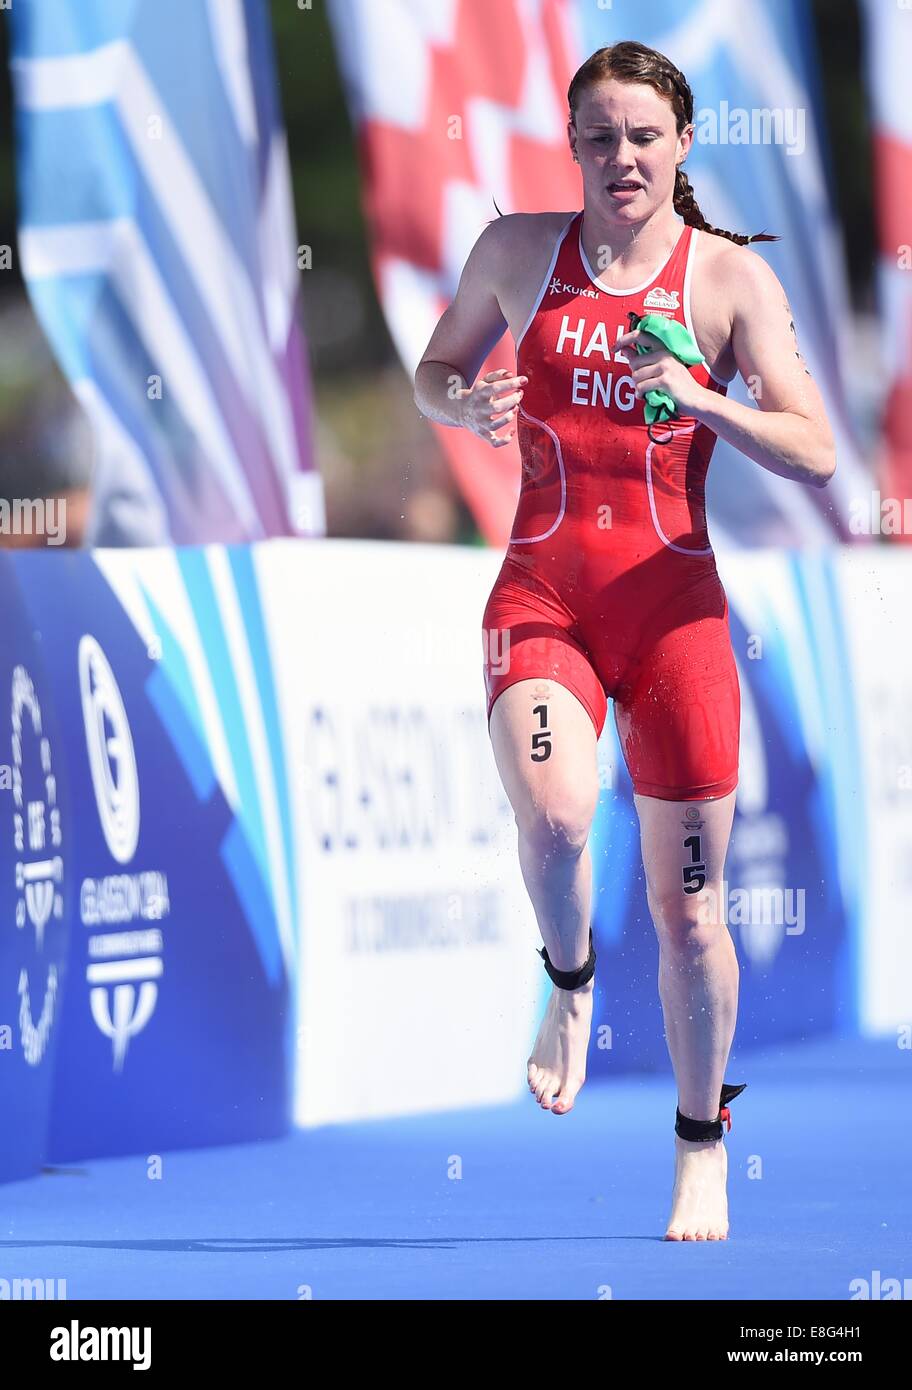 Lucy Hall (ENG). Triathlon. Strathclyde Country Park, Glasgow, Scotland, UK -  240714 - Glasgow 2014 Commonwealth Games Stock Photo